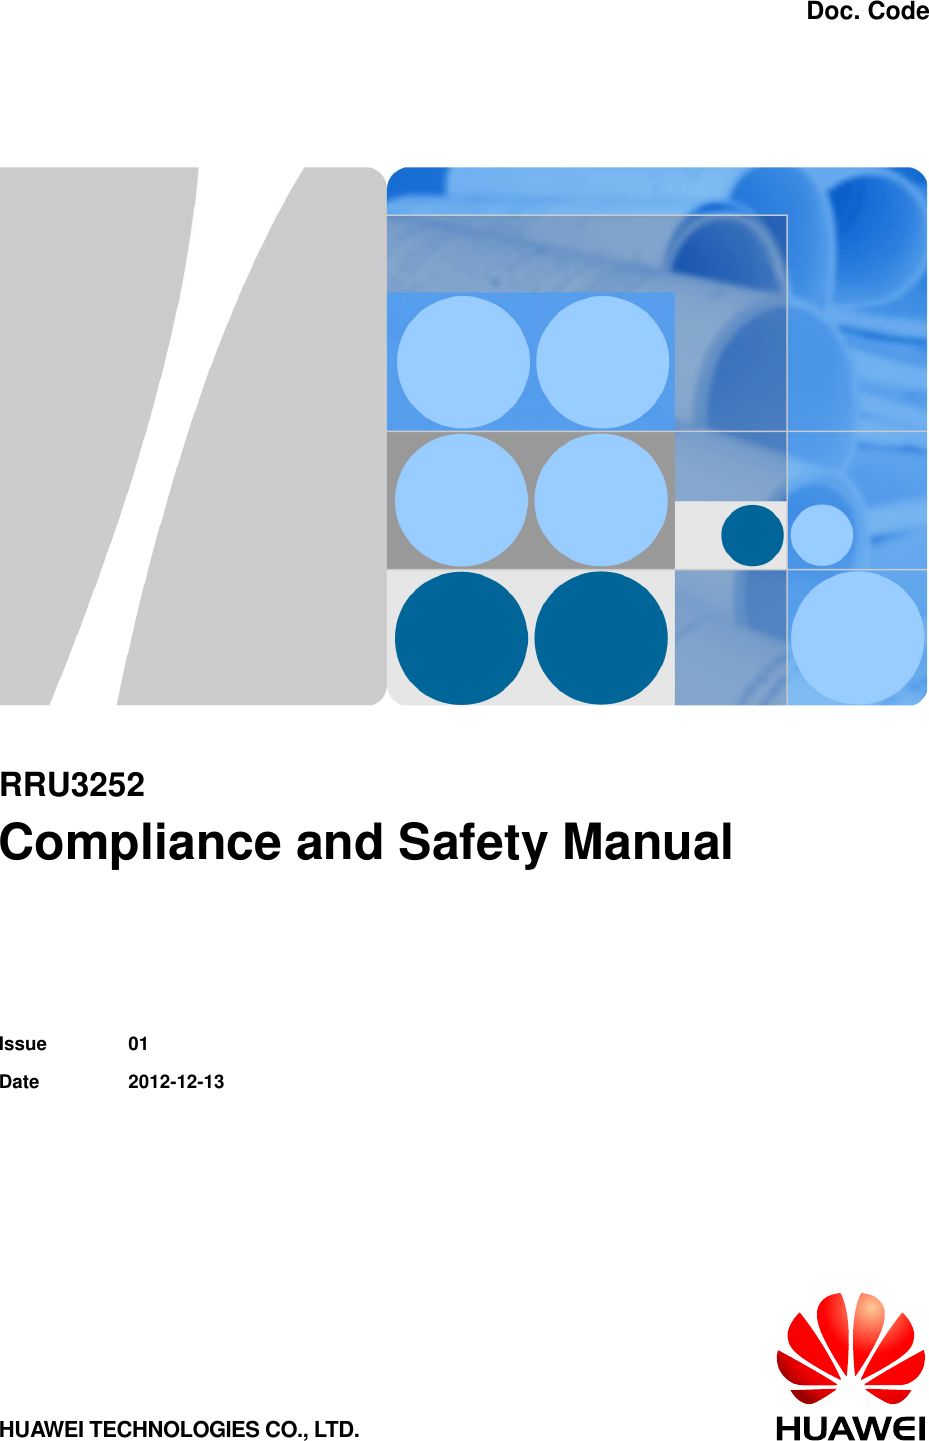    Doc. Code   RRU3252 Compliance and Safety Manual   Issue  01 Date  2012-12-13  HUAWEI TECHNOLOGIES CO., LTD.  